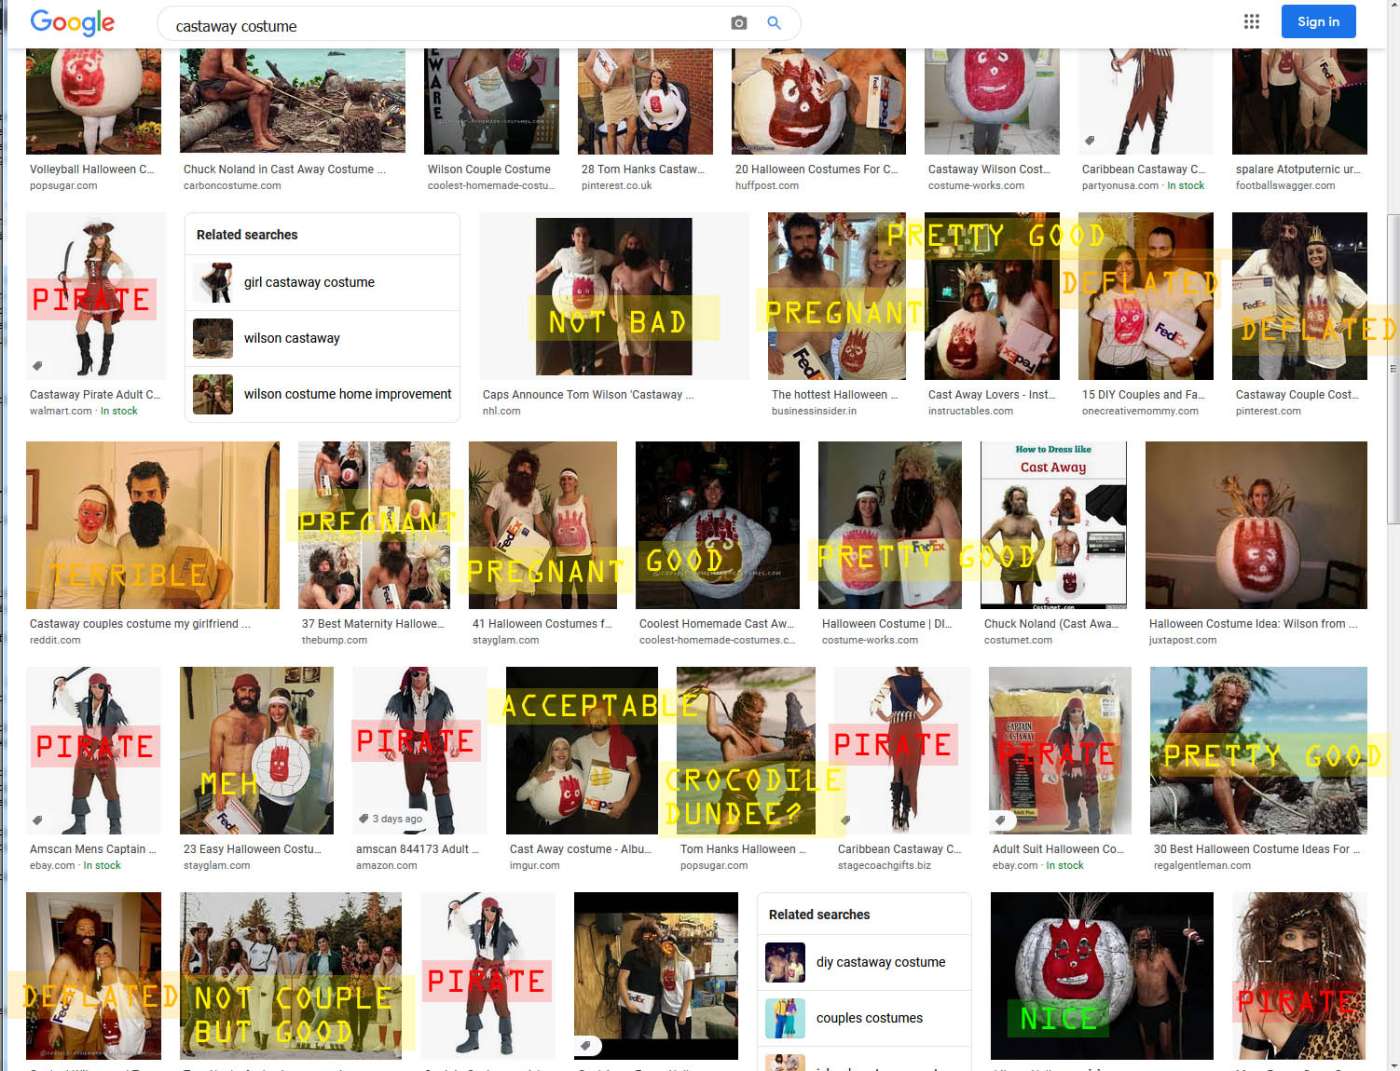 Castaway costumes Google images search hits